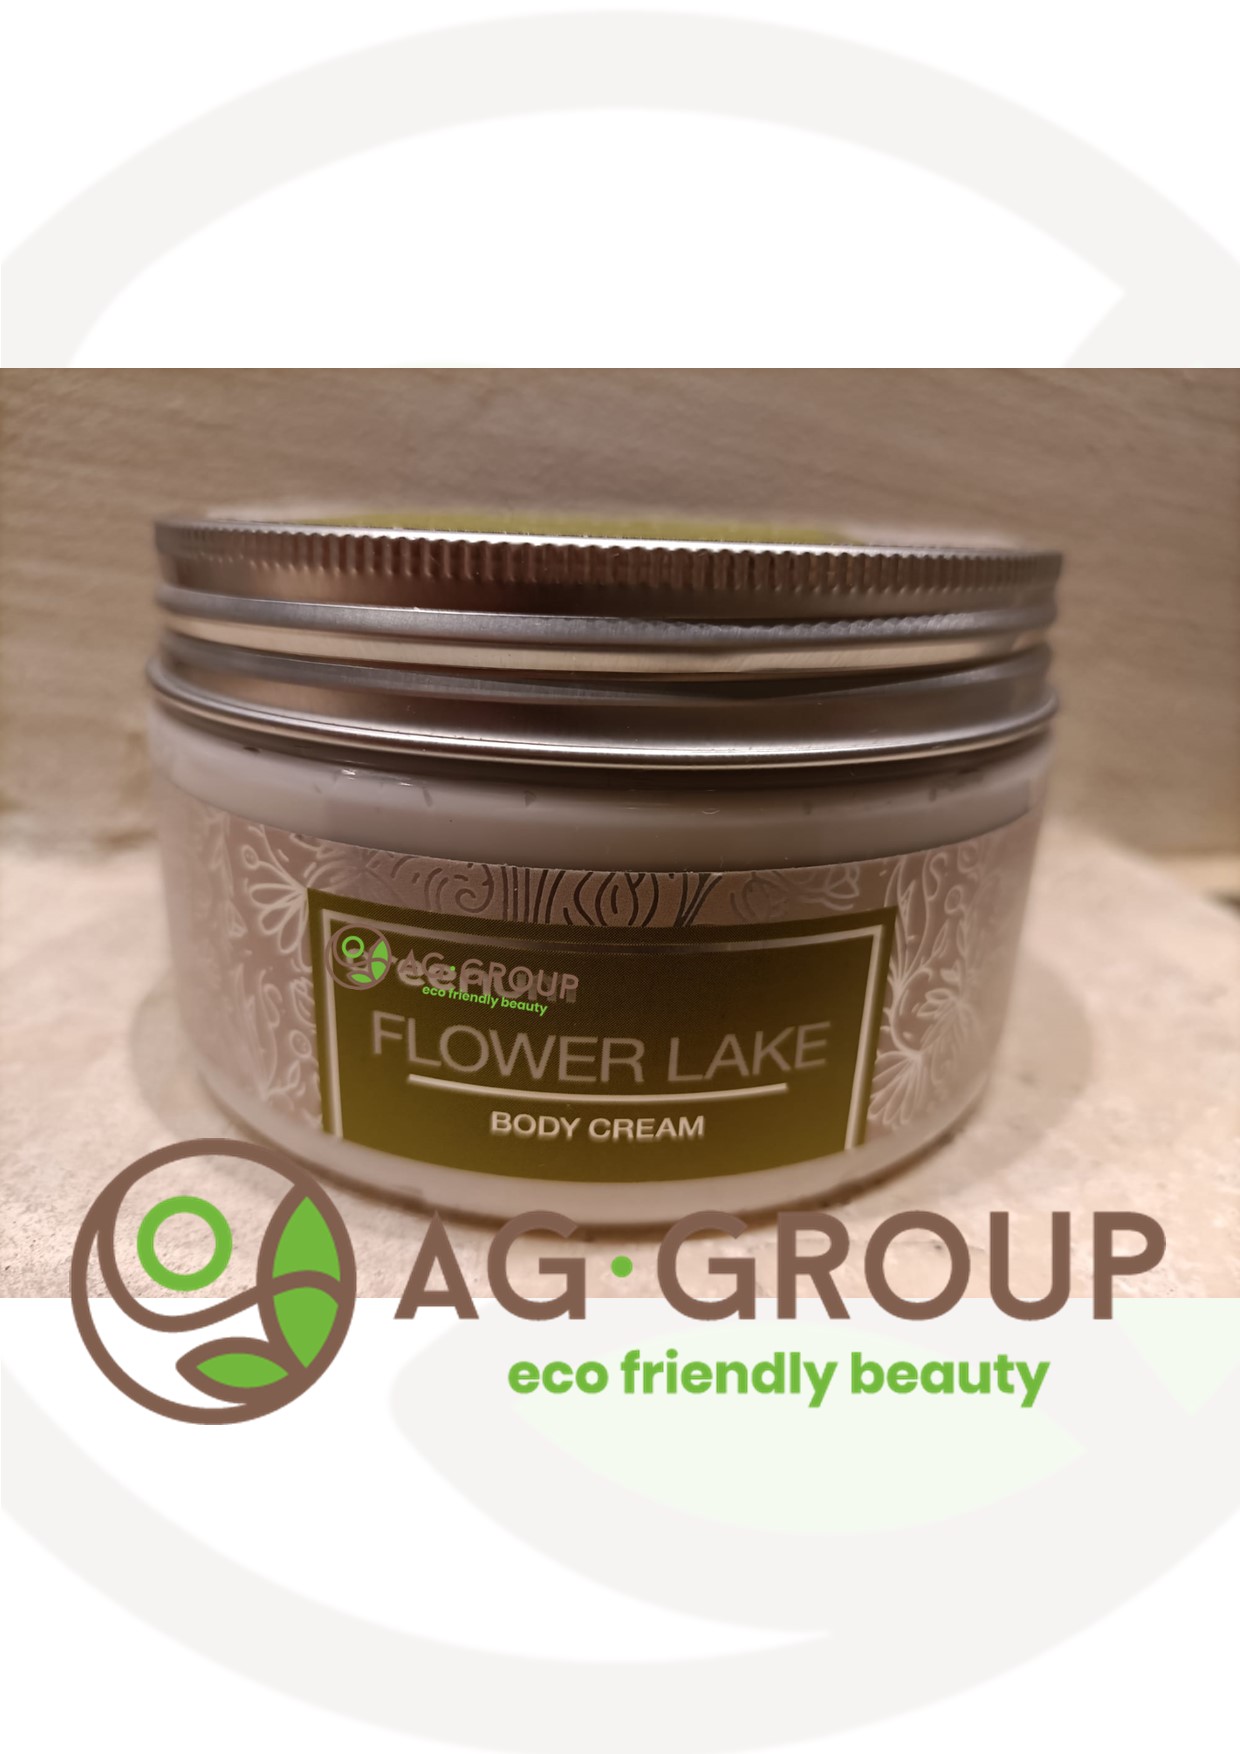 Featured image for “CREMA CORPO FLOWER LAKE 200GR.”